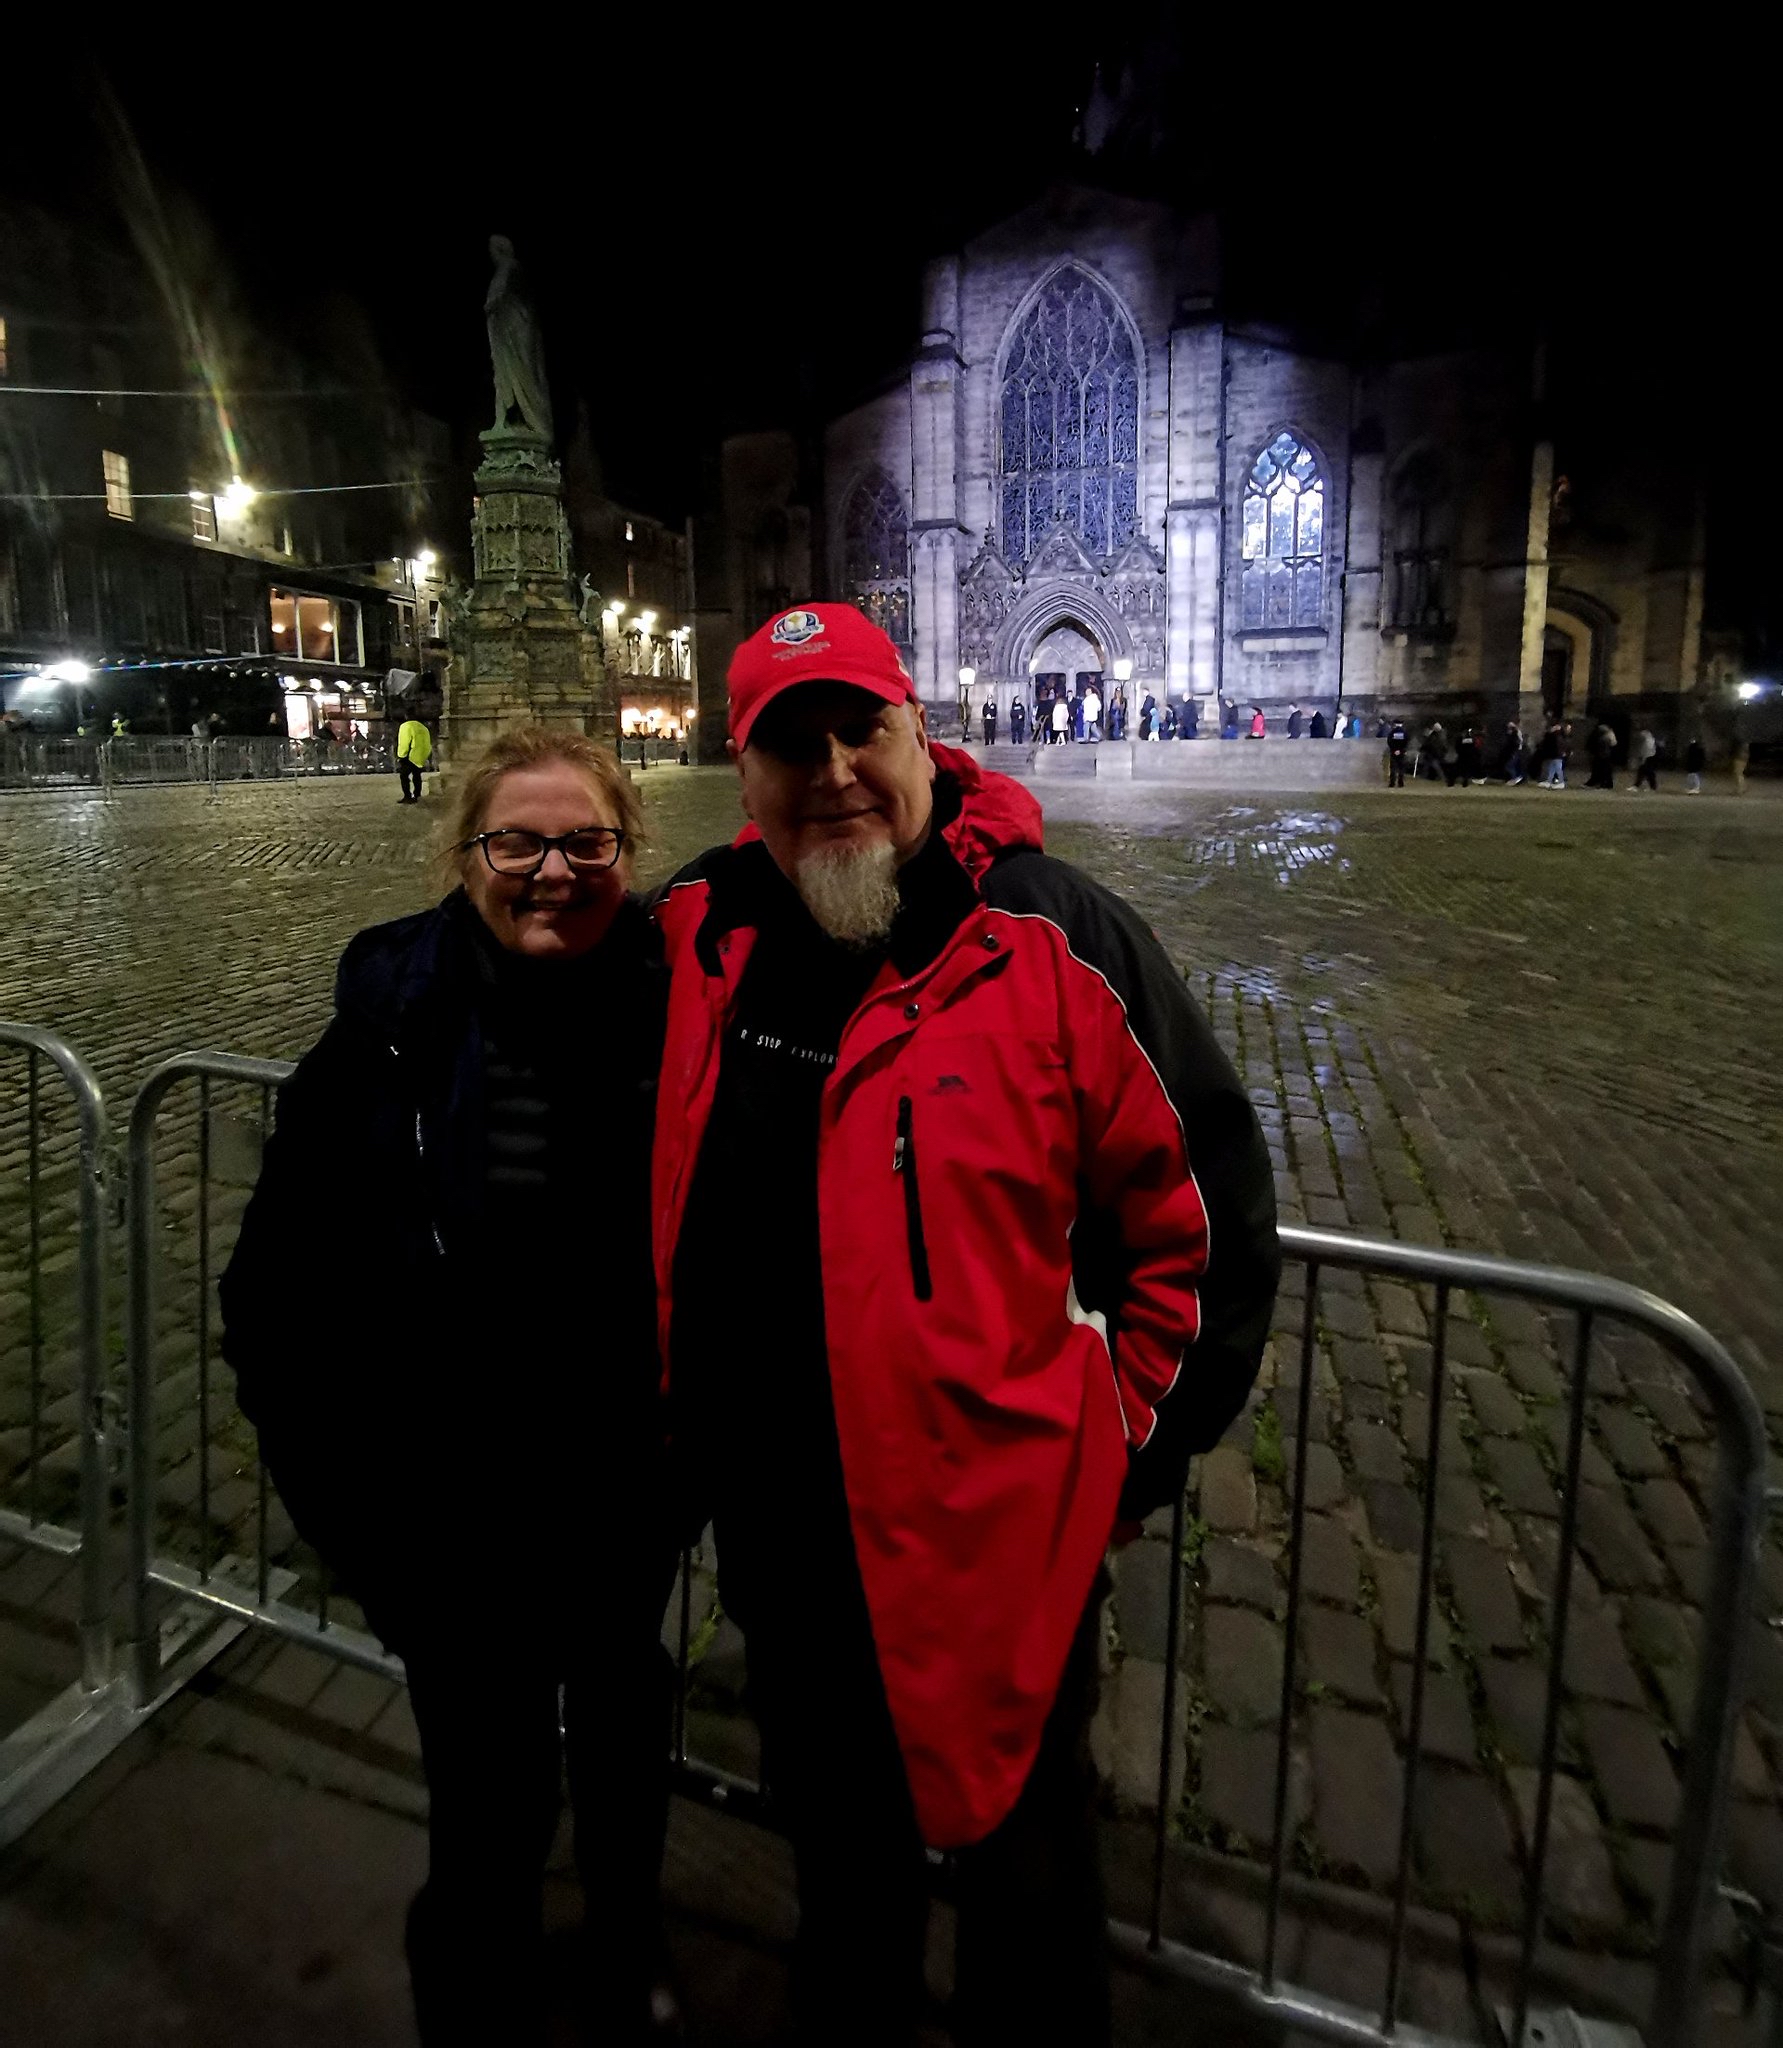 Siblings Mitch Stevenson and Moira Henderson outside St Giles' Cathedral, Edinburgh